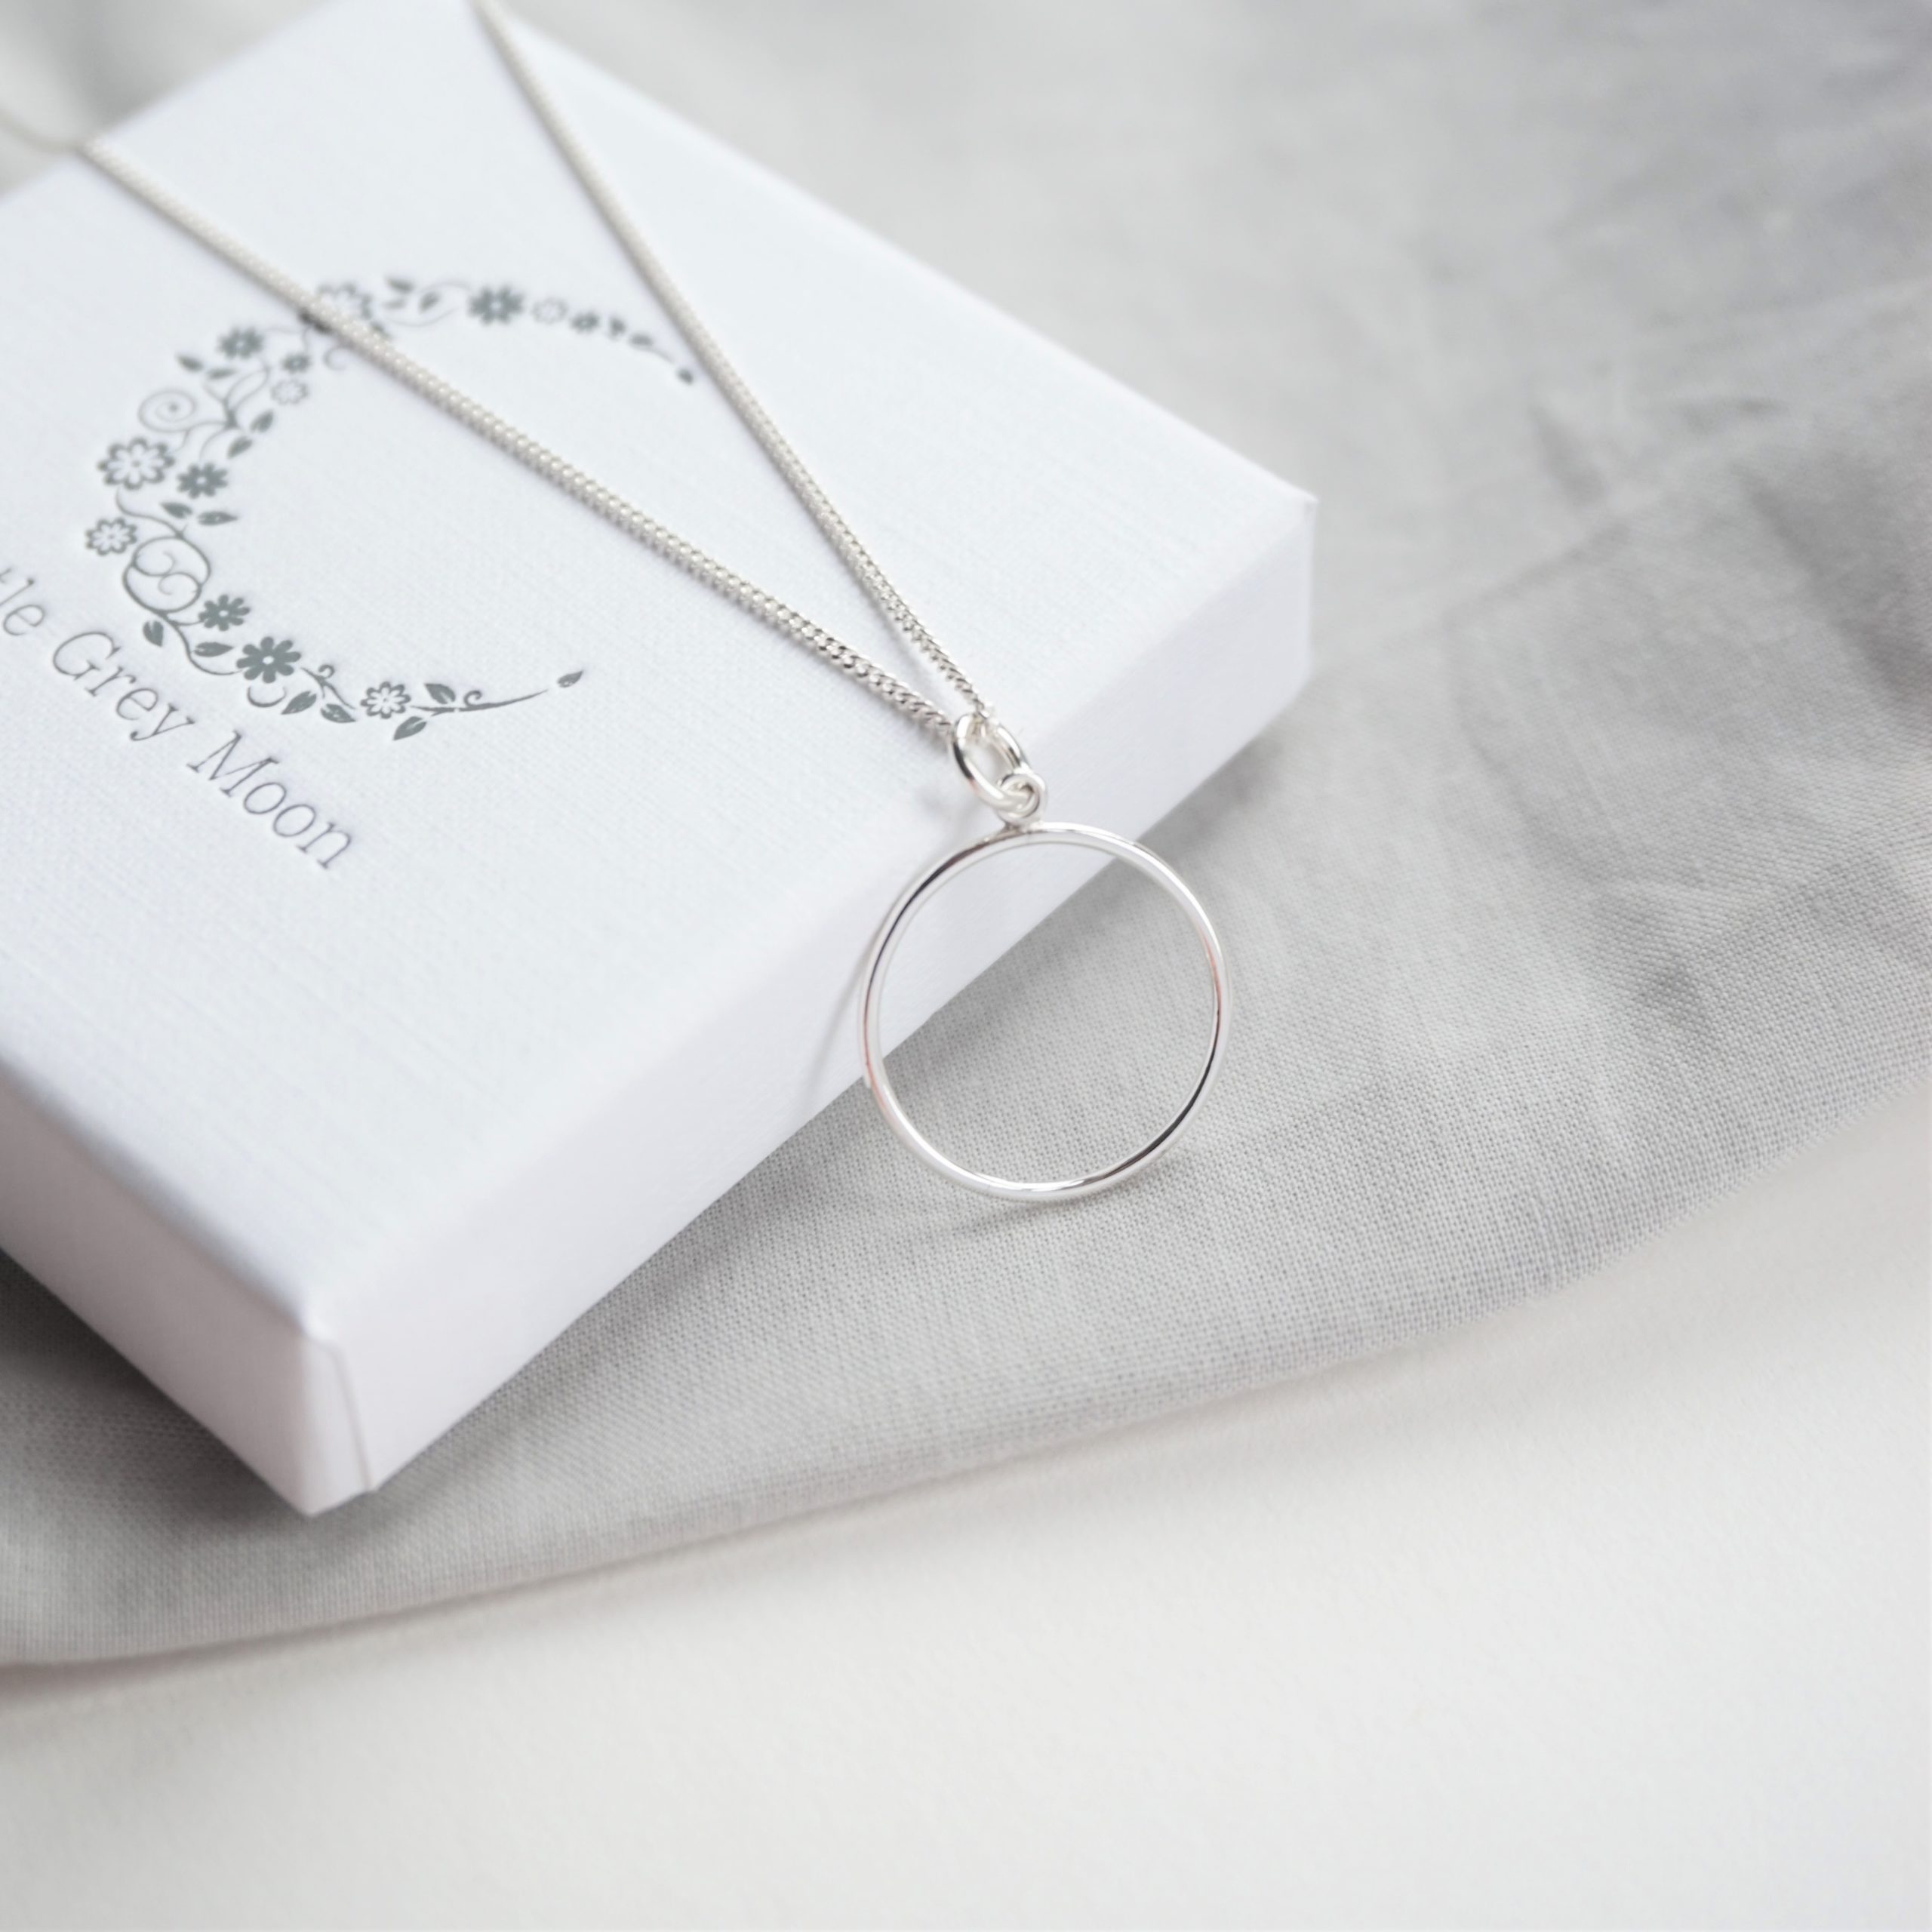 sterling silver necklace with new karma circle